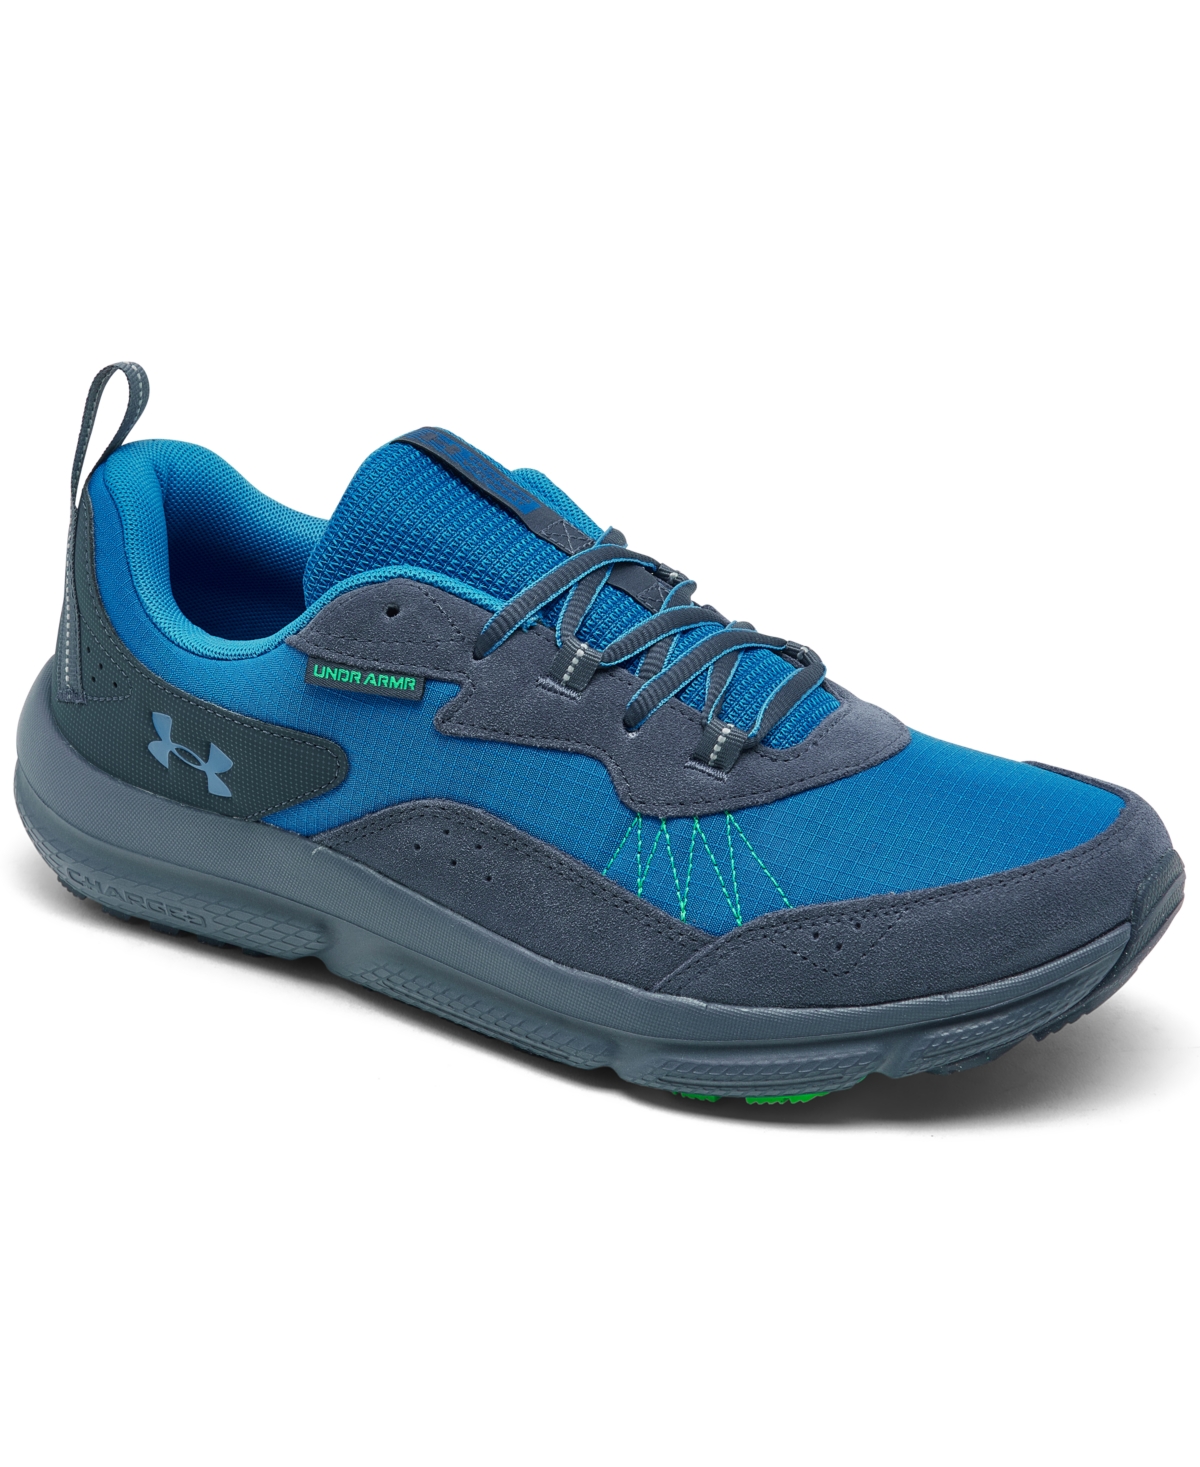 Men's Charged Verssert 2 Running Sneakers from Finish Line - Photon blue/grey